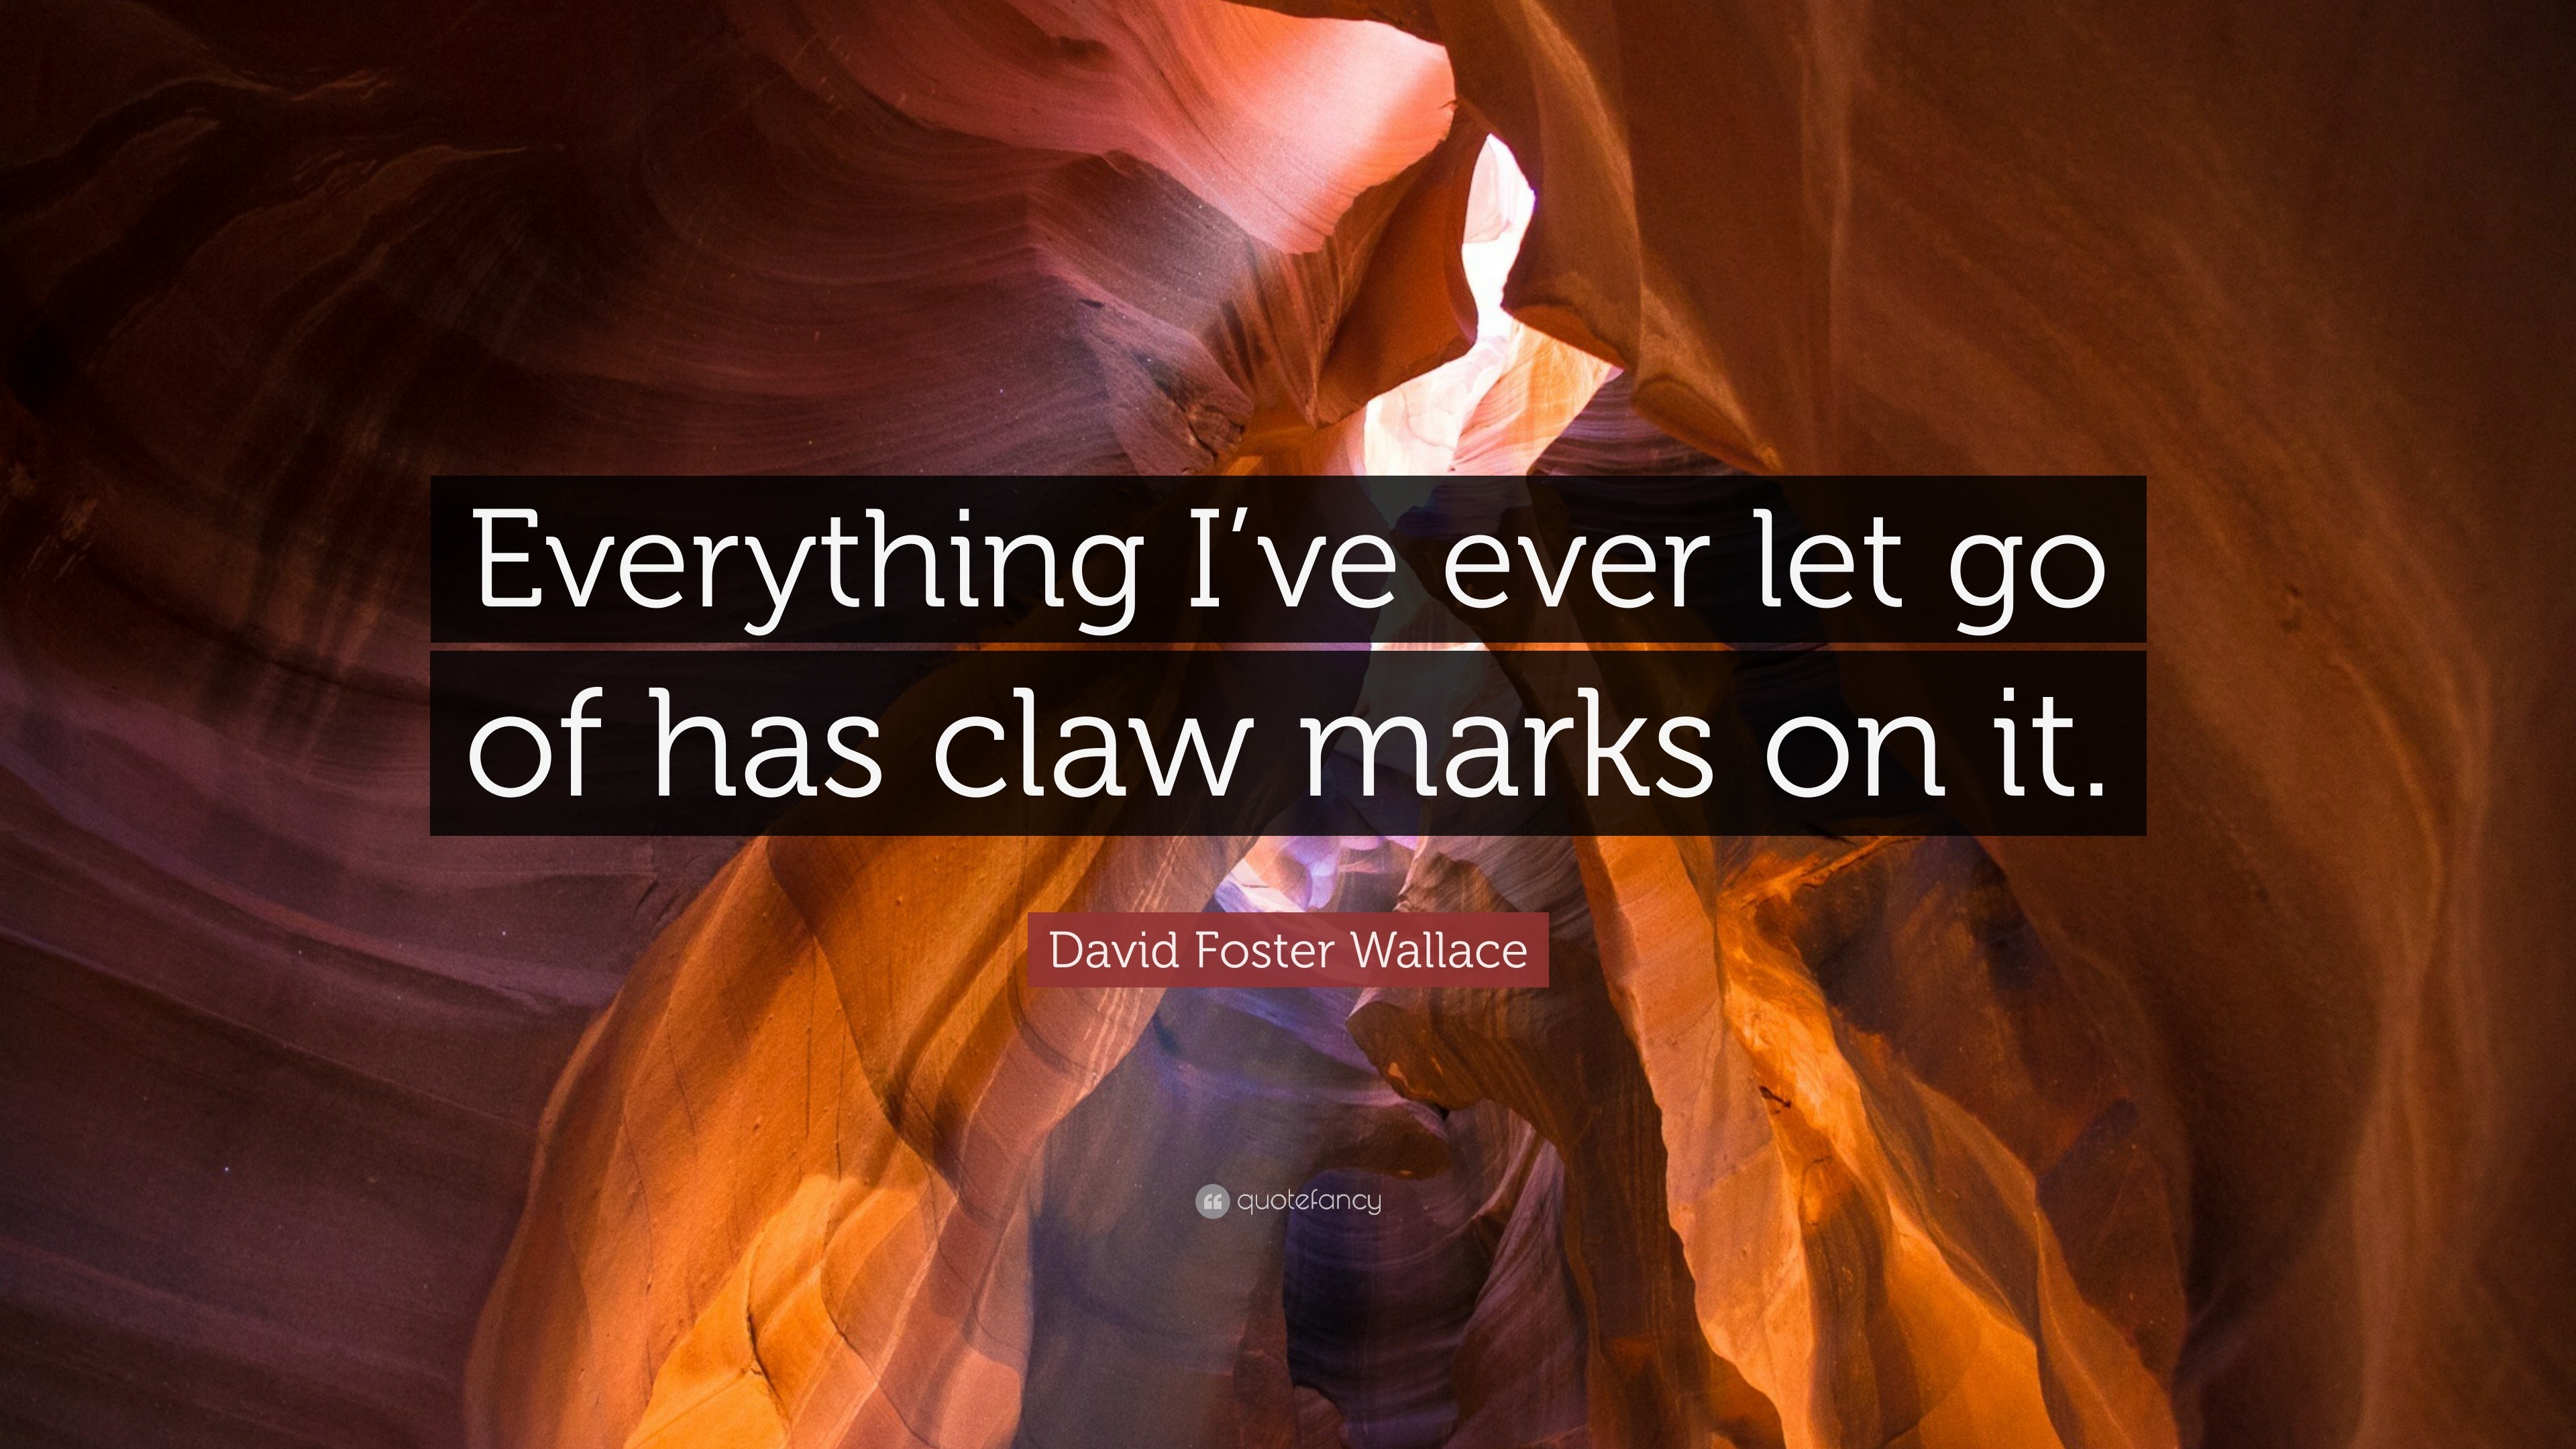 David Foster Wallace Quote: “Everything I’ve ever let go of has claw